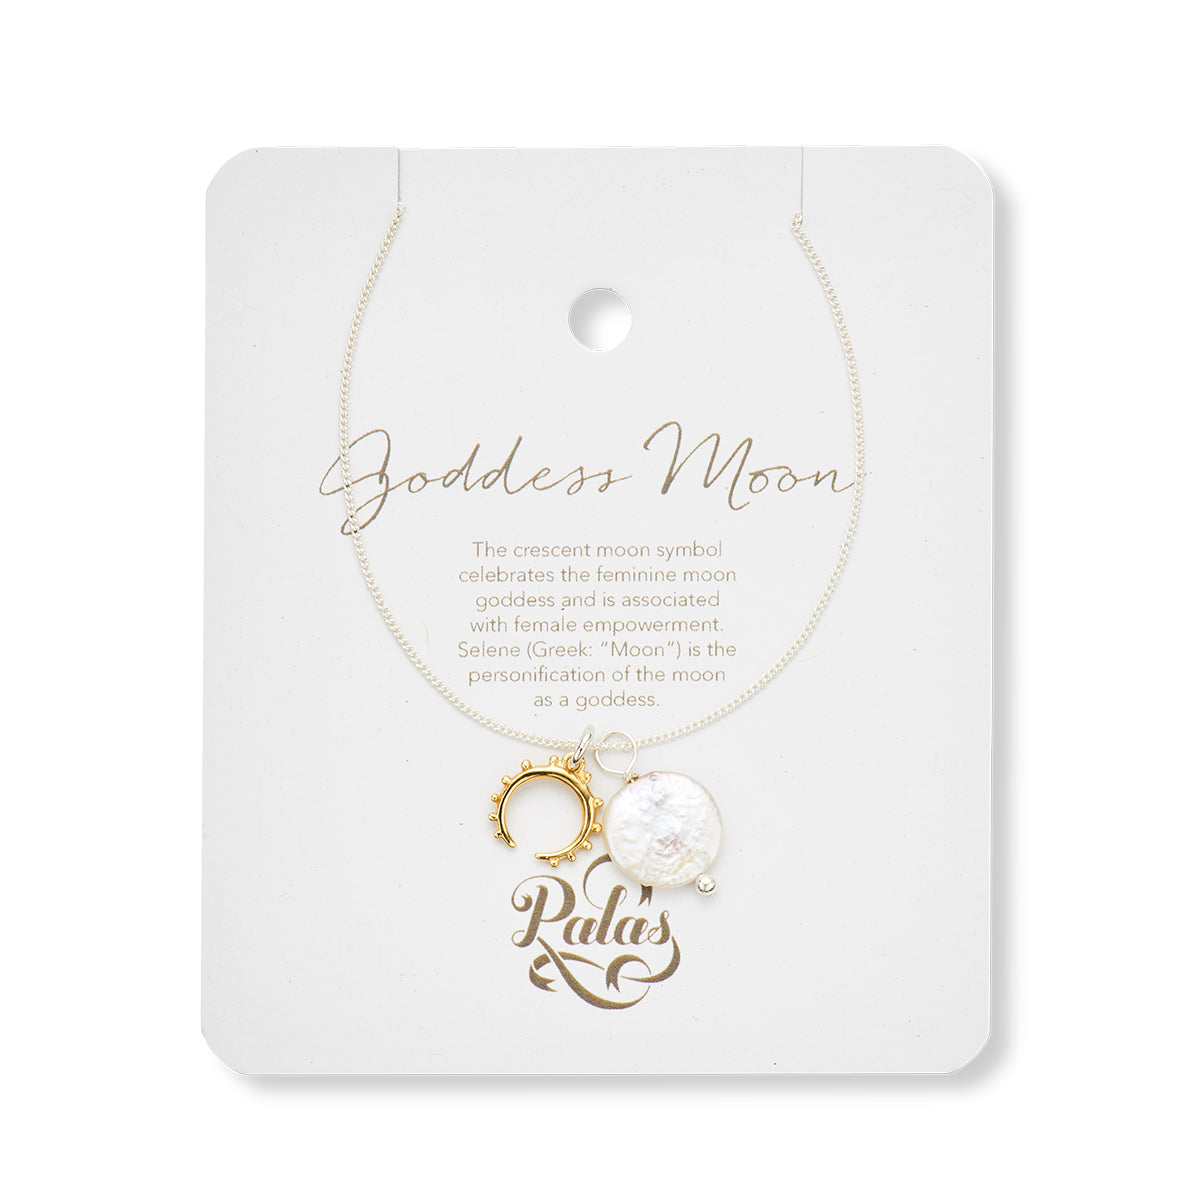 goddess moon and pearl amulet necklace